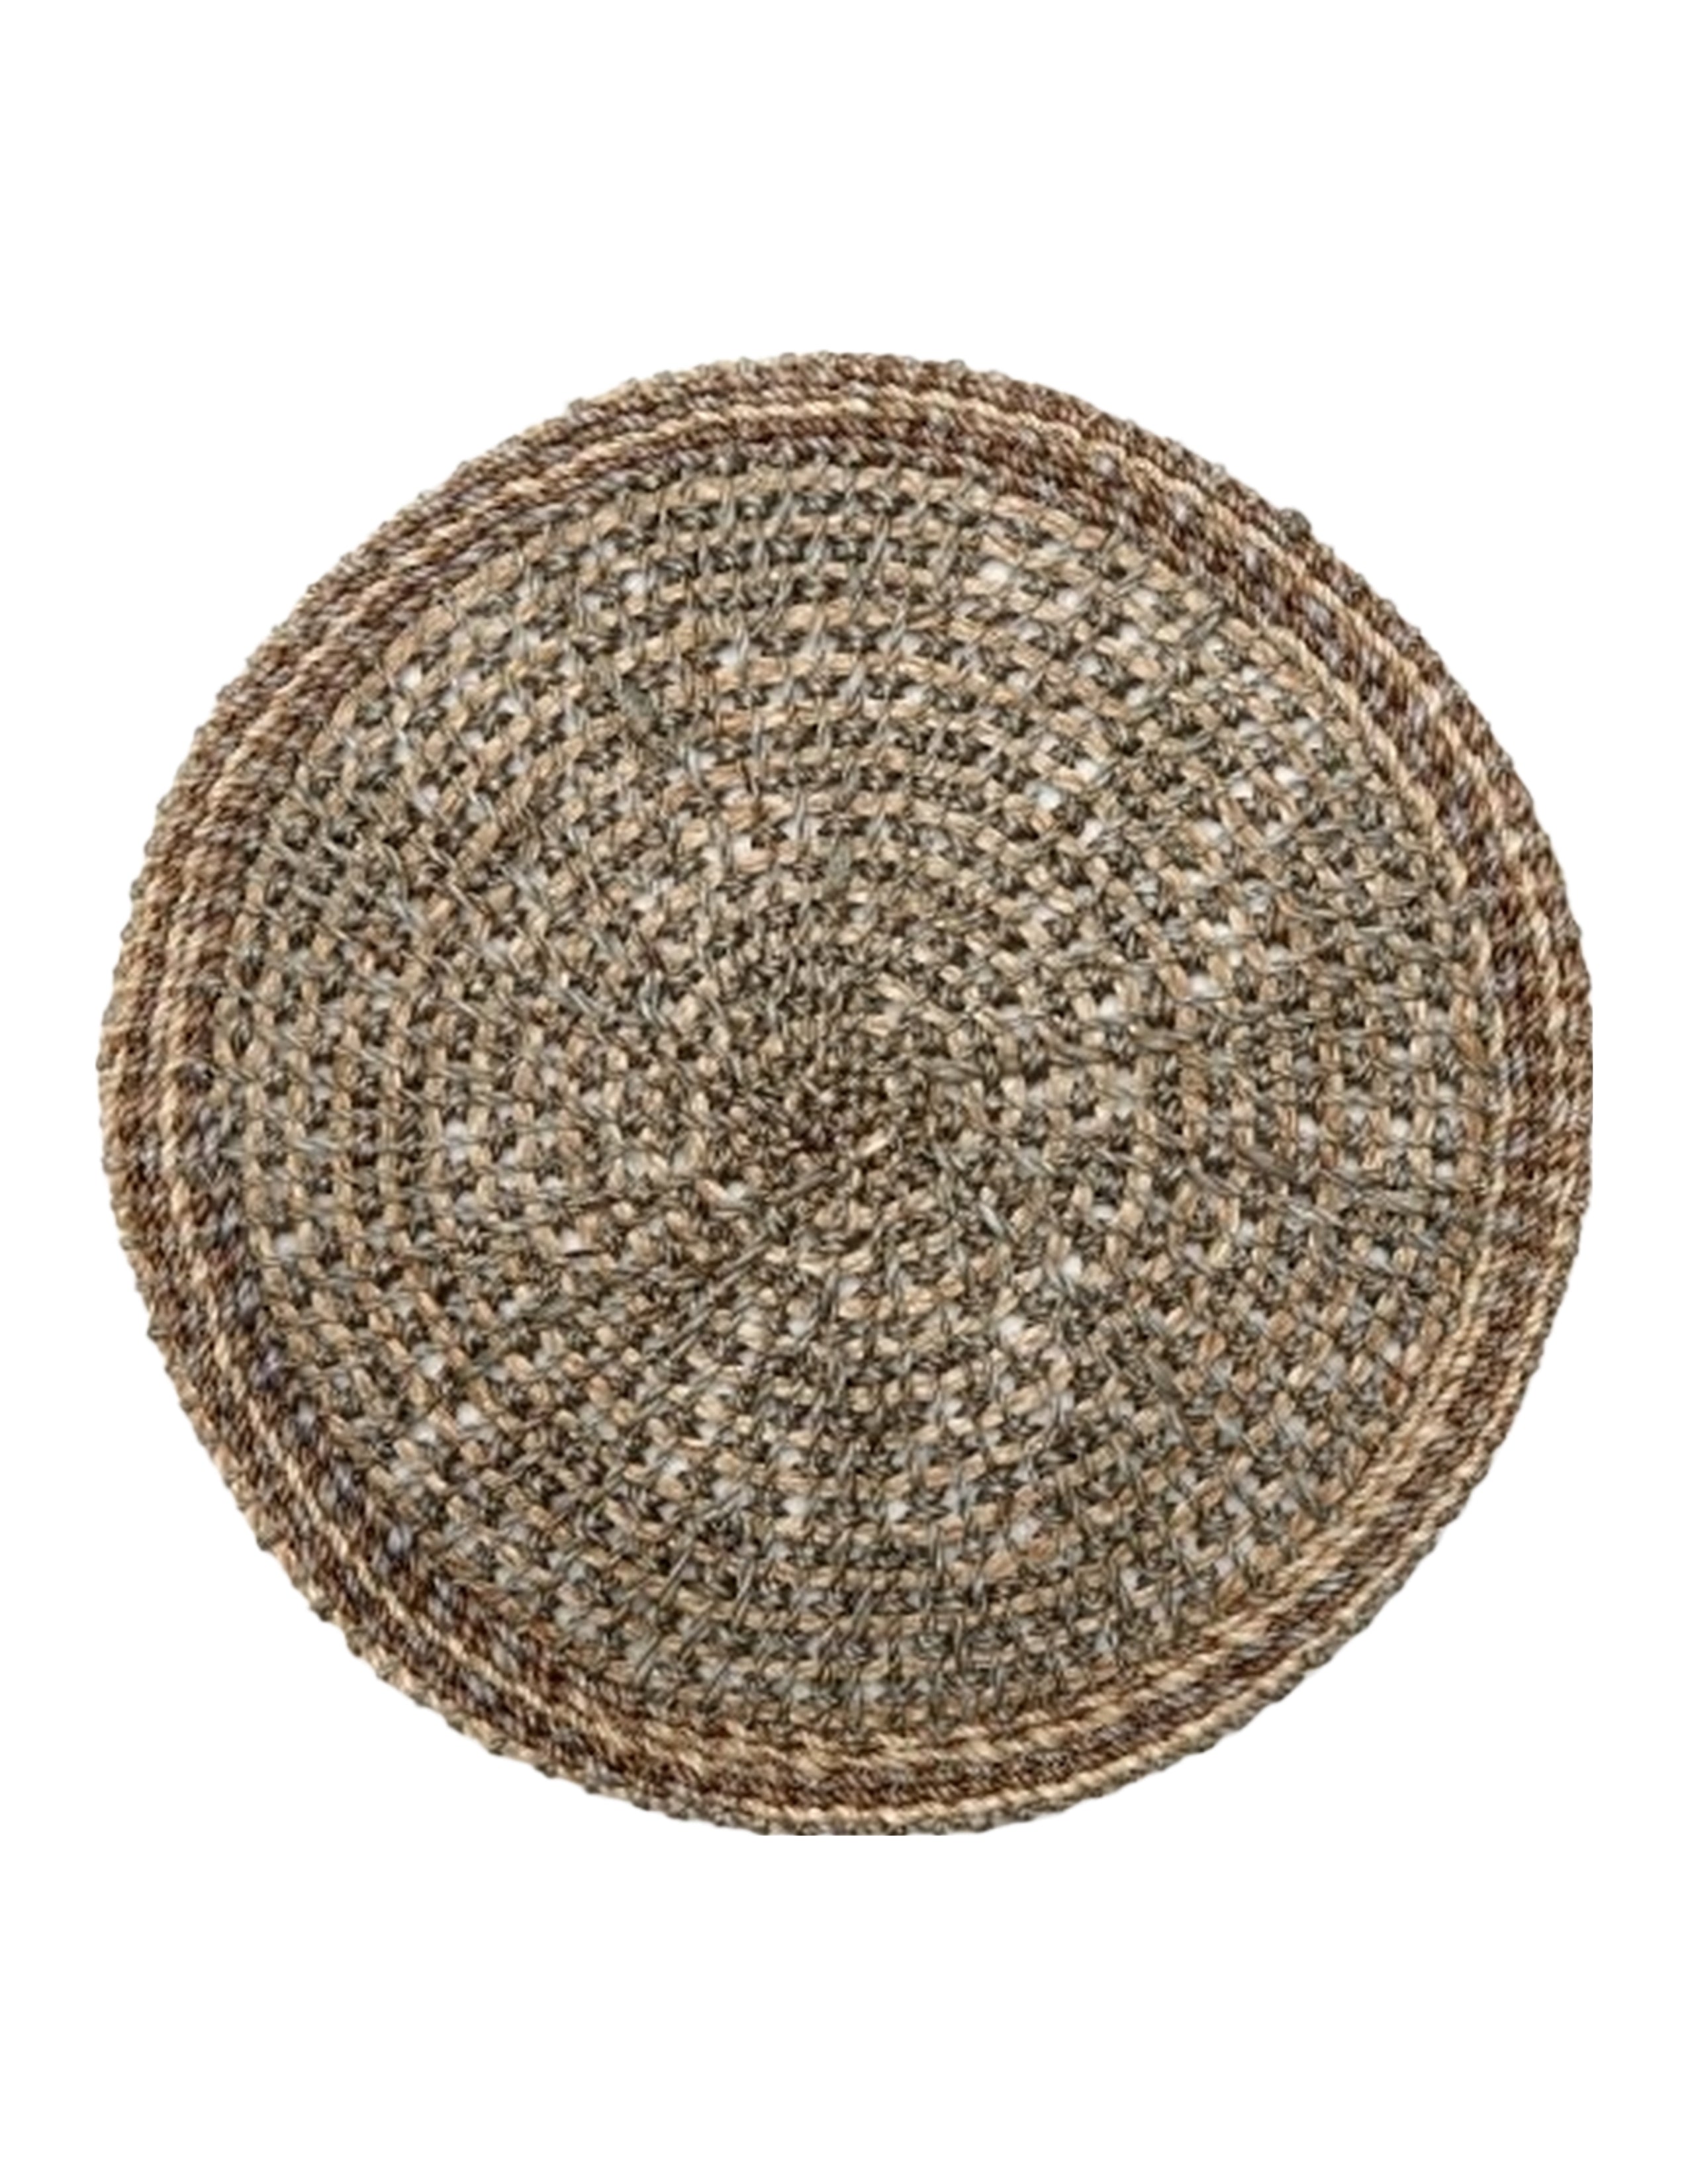 Crochet Abaca Placemat Set of 4 - Grey